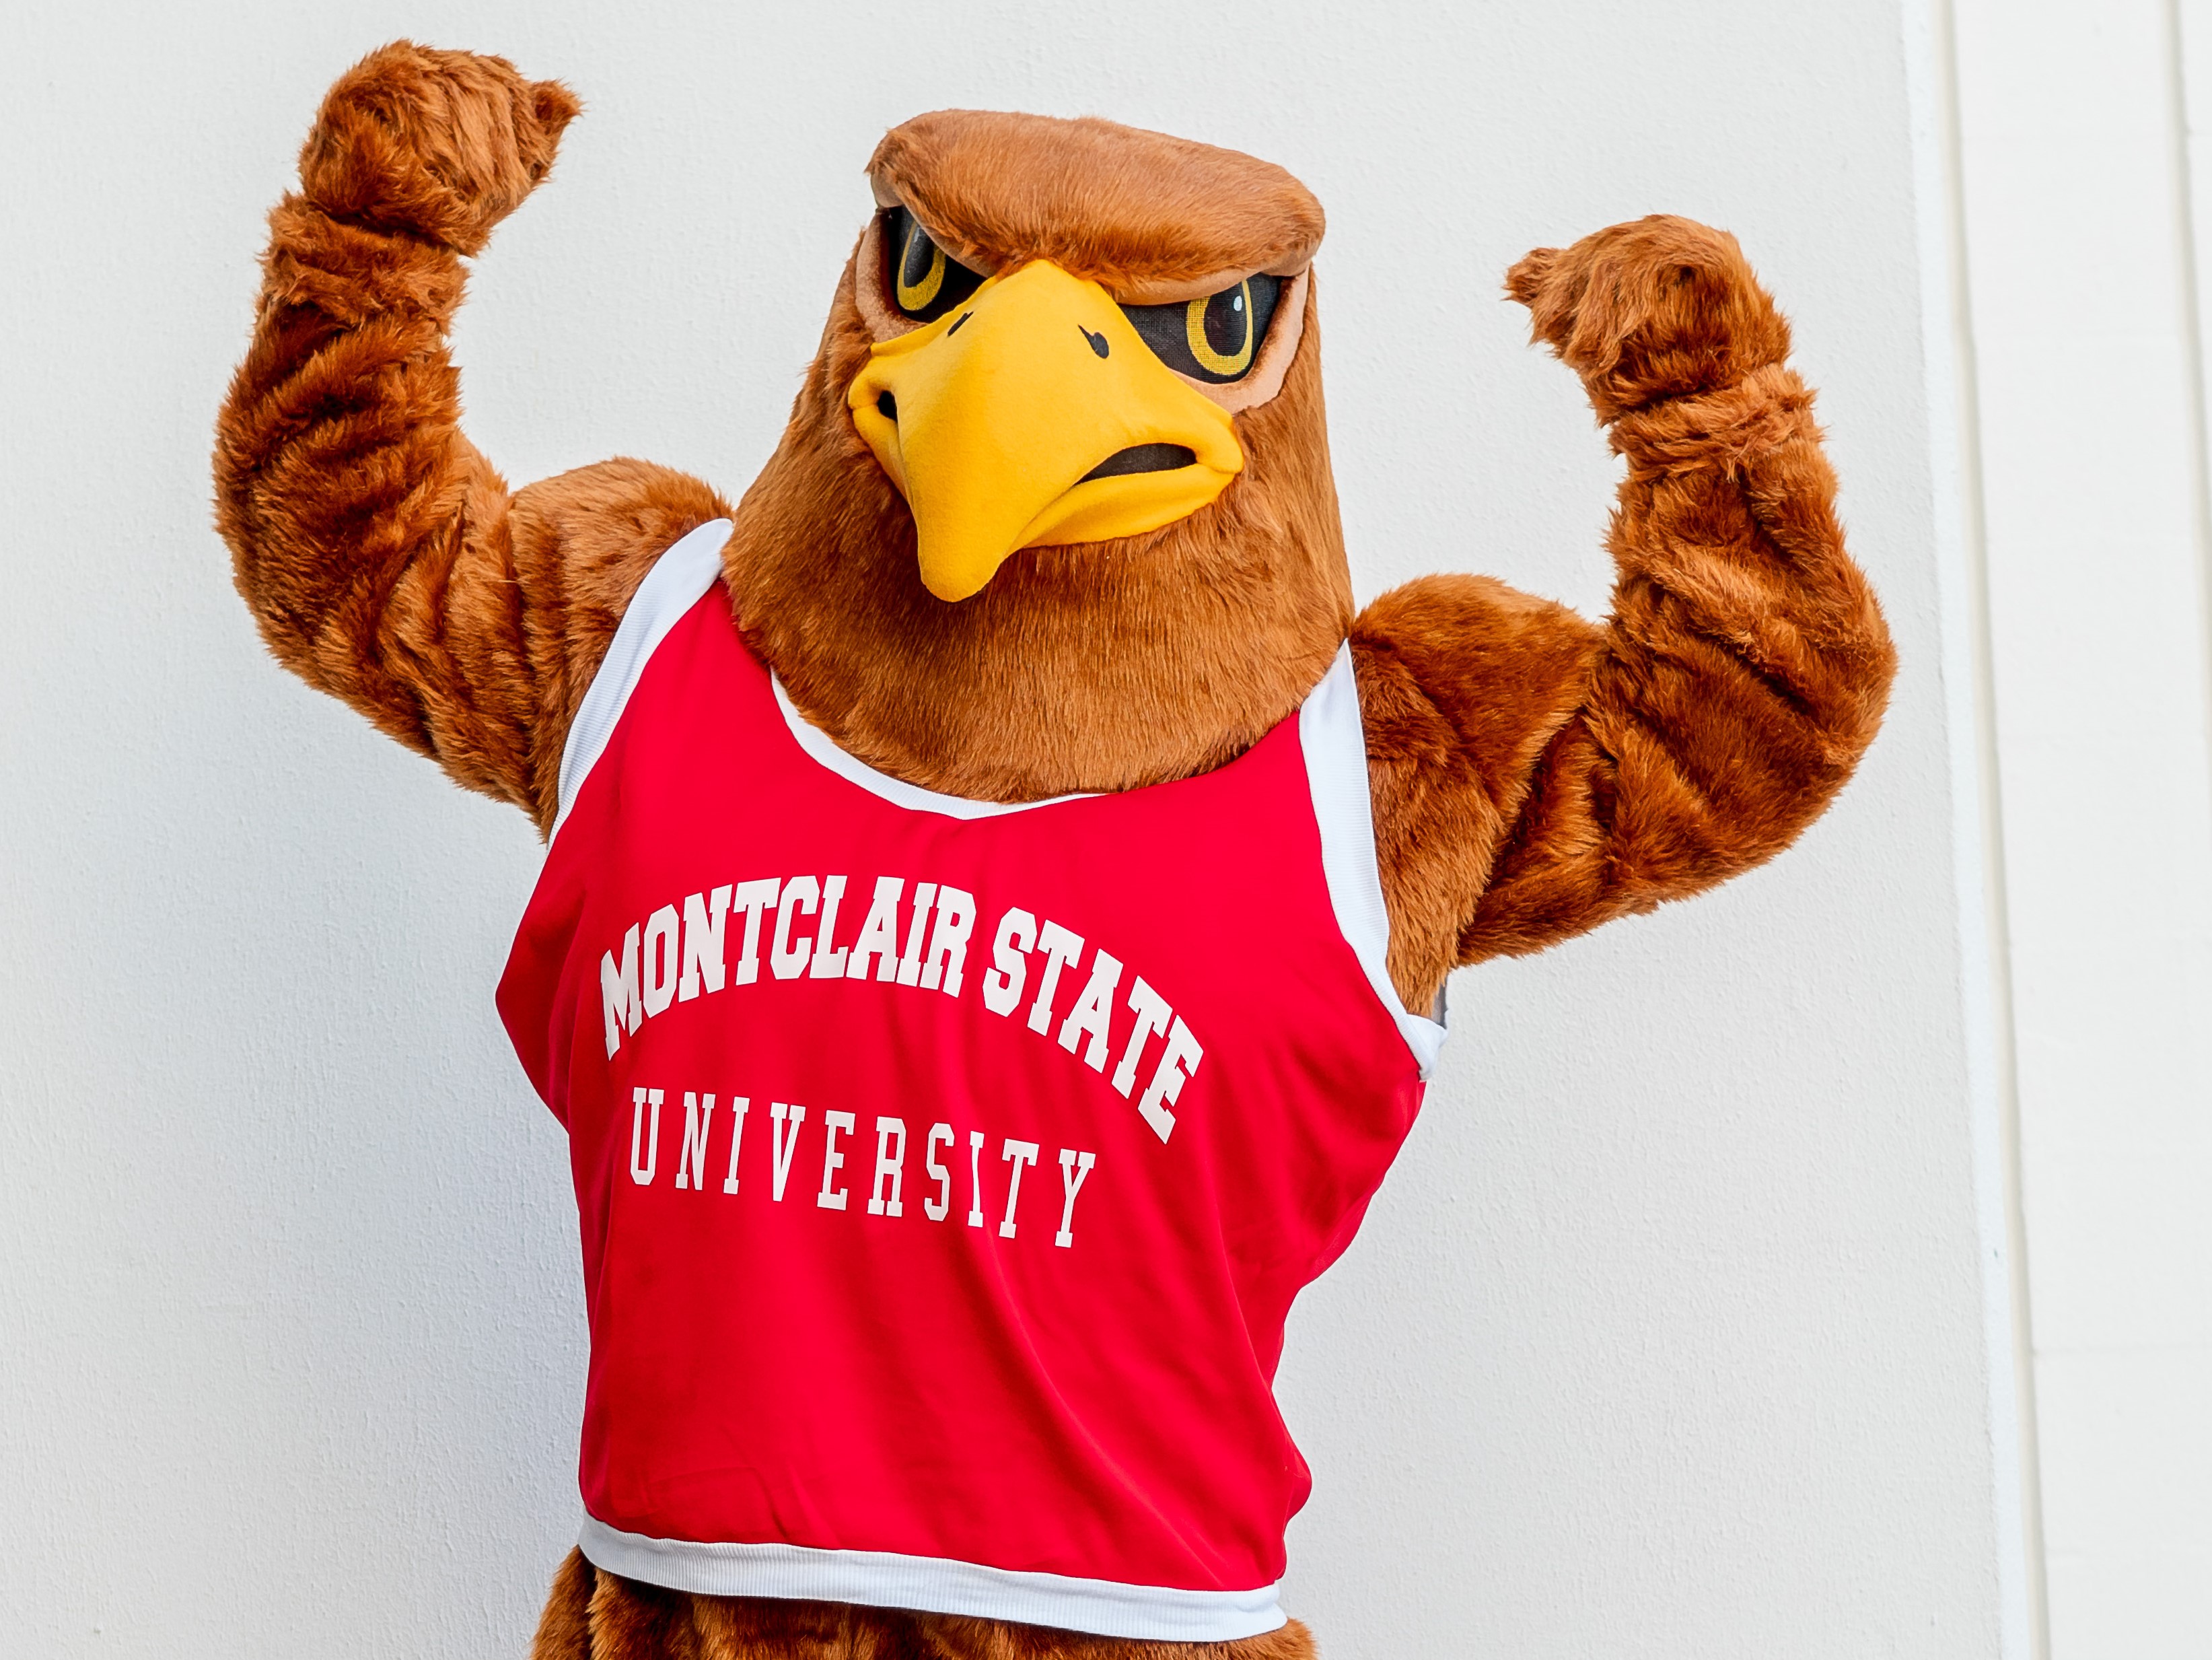 Meet Rocky The Red Hawk The Montclair State Mascot Who Uses Social Media To Make Allies Of His Rivals Silive Com